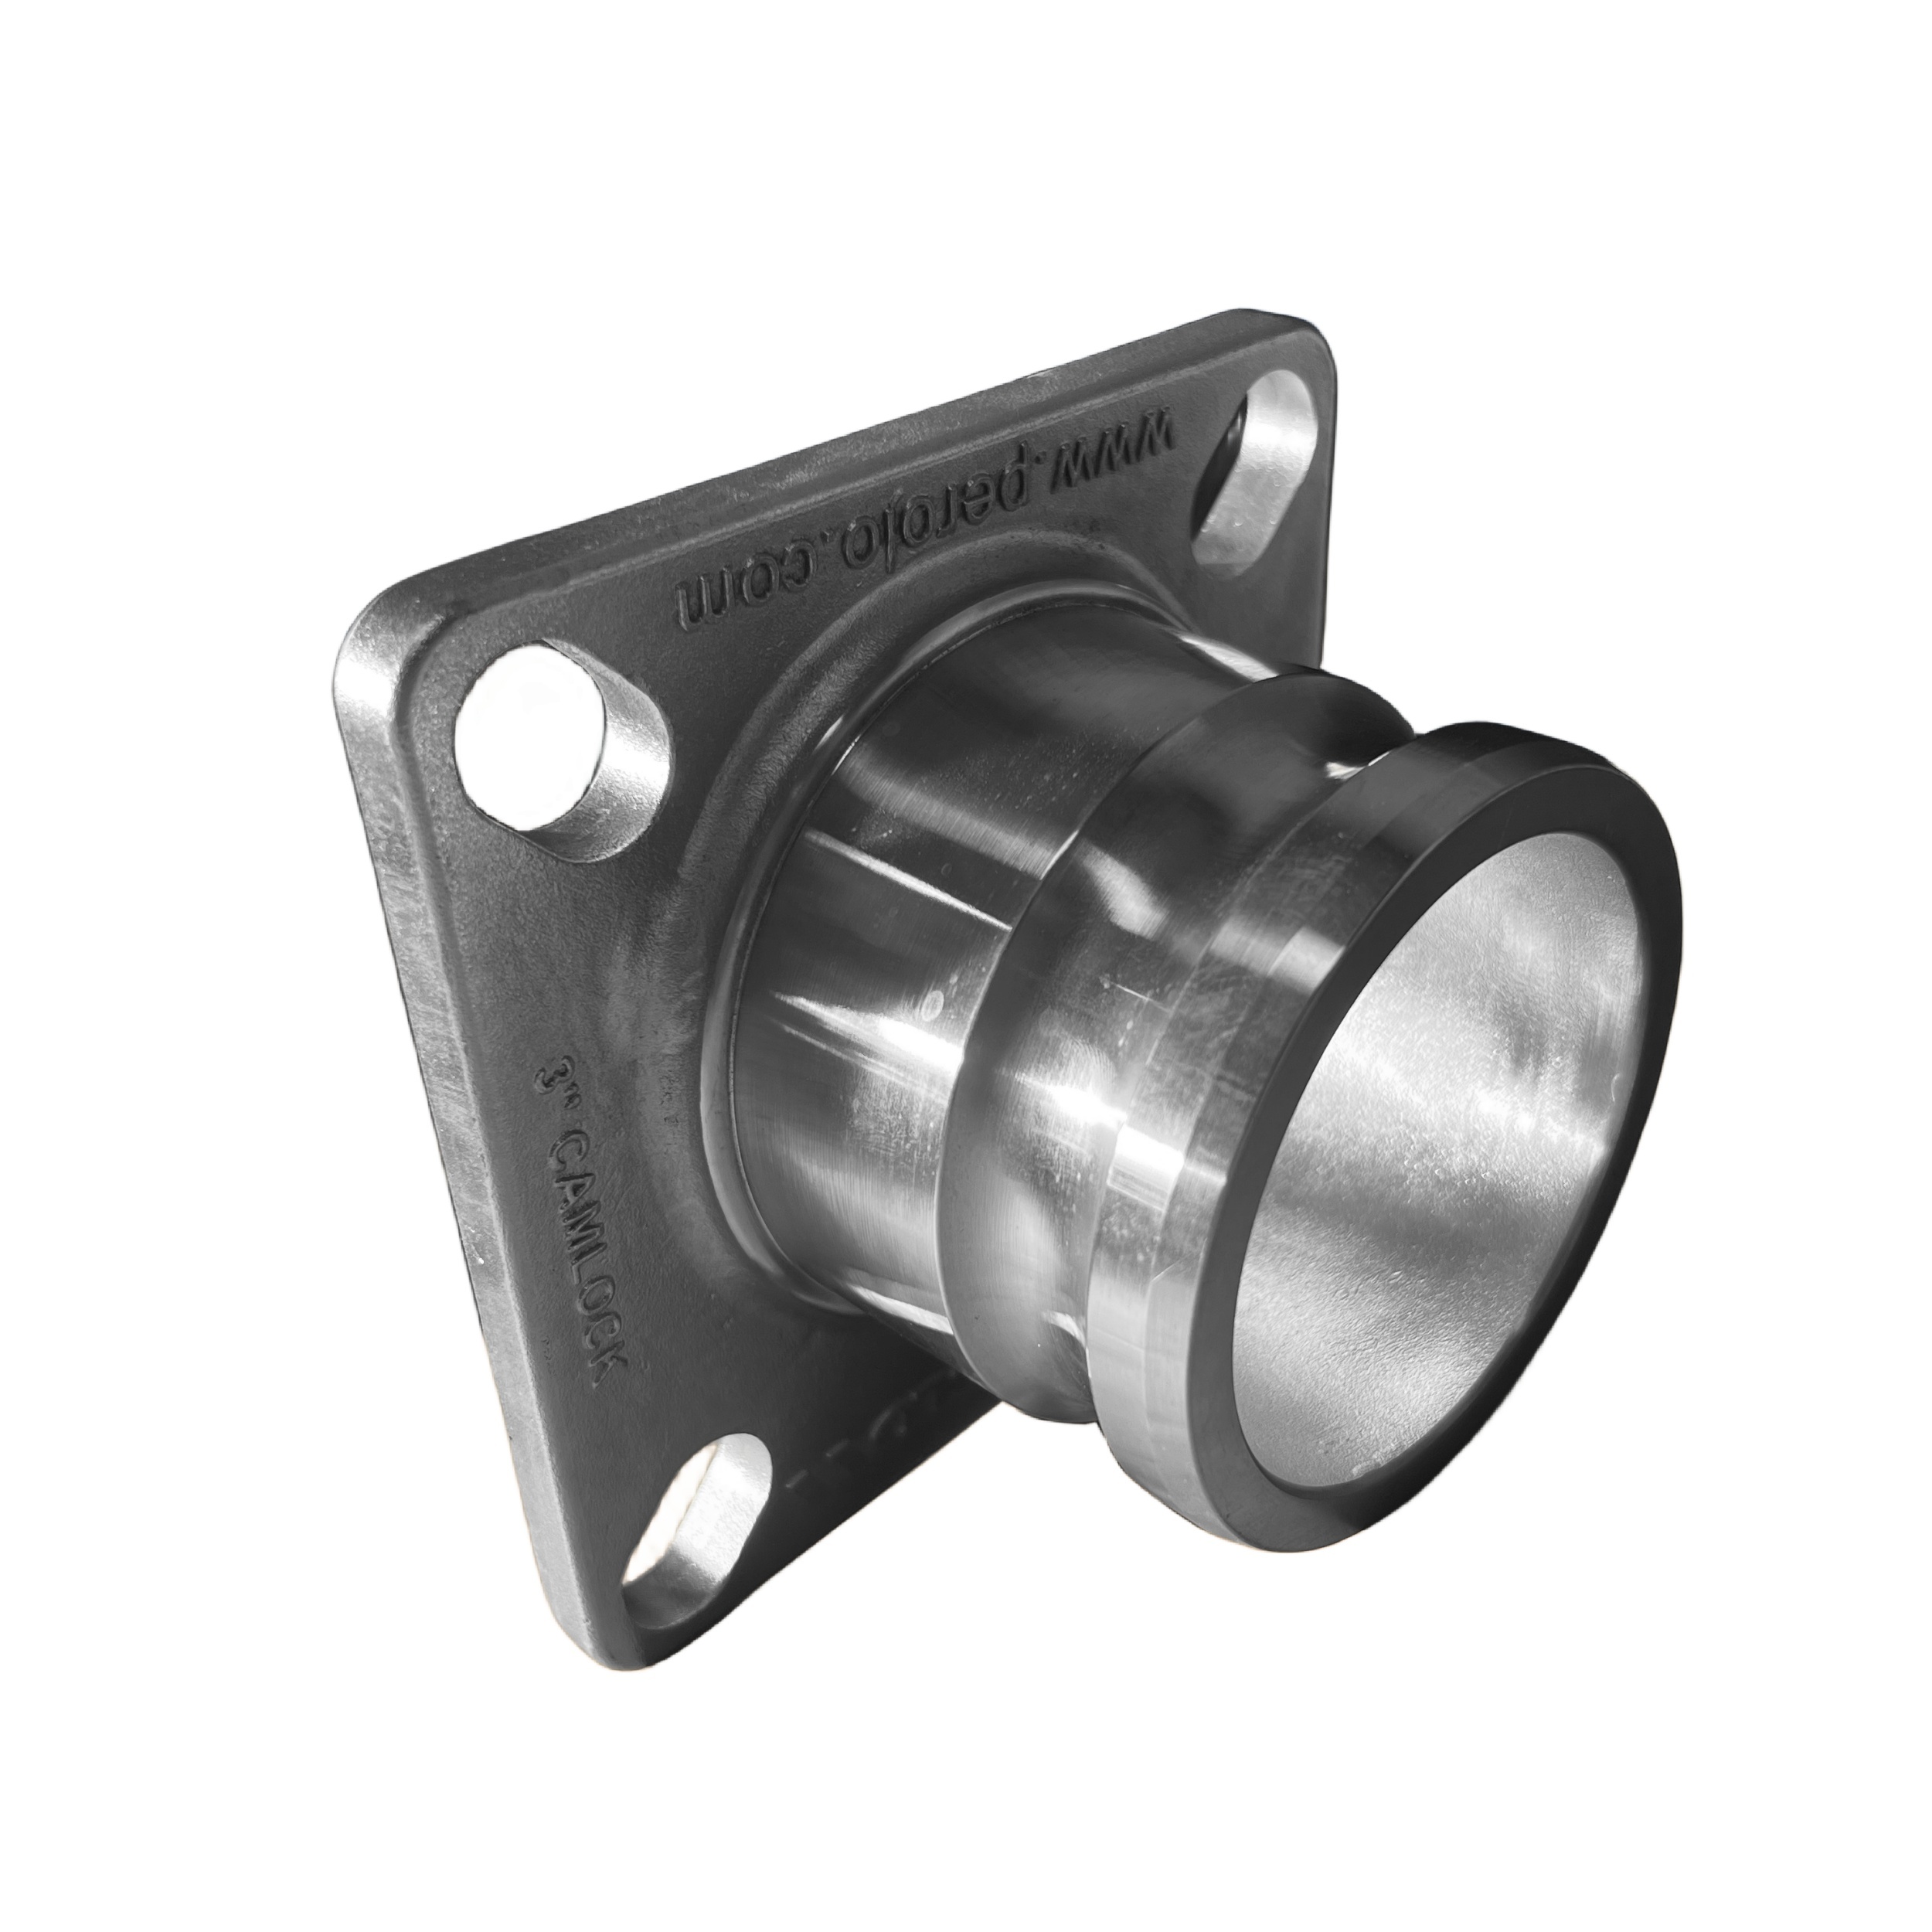 OUTLET NOZZLE CAMLOCK 3